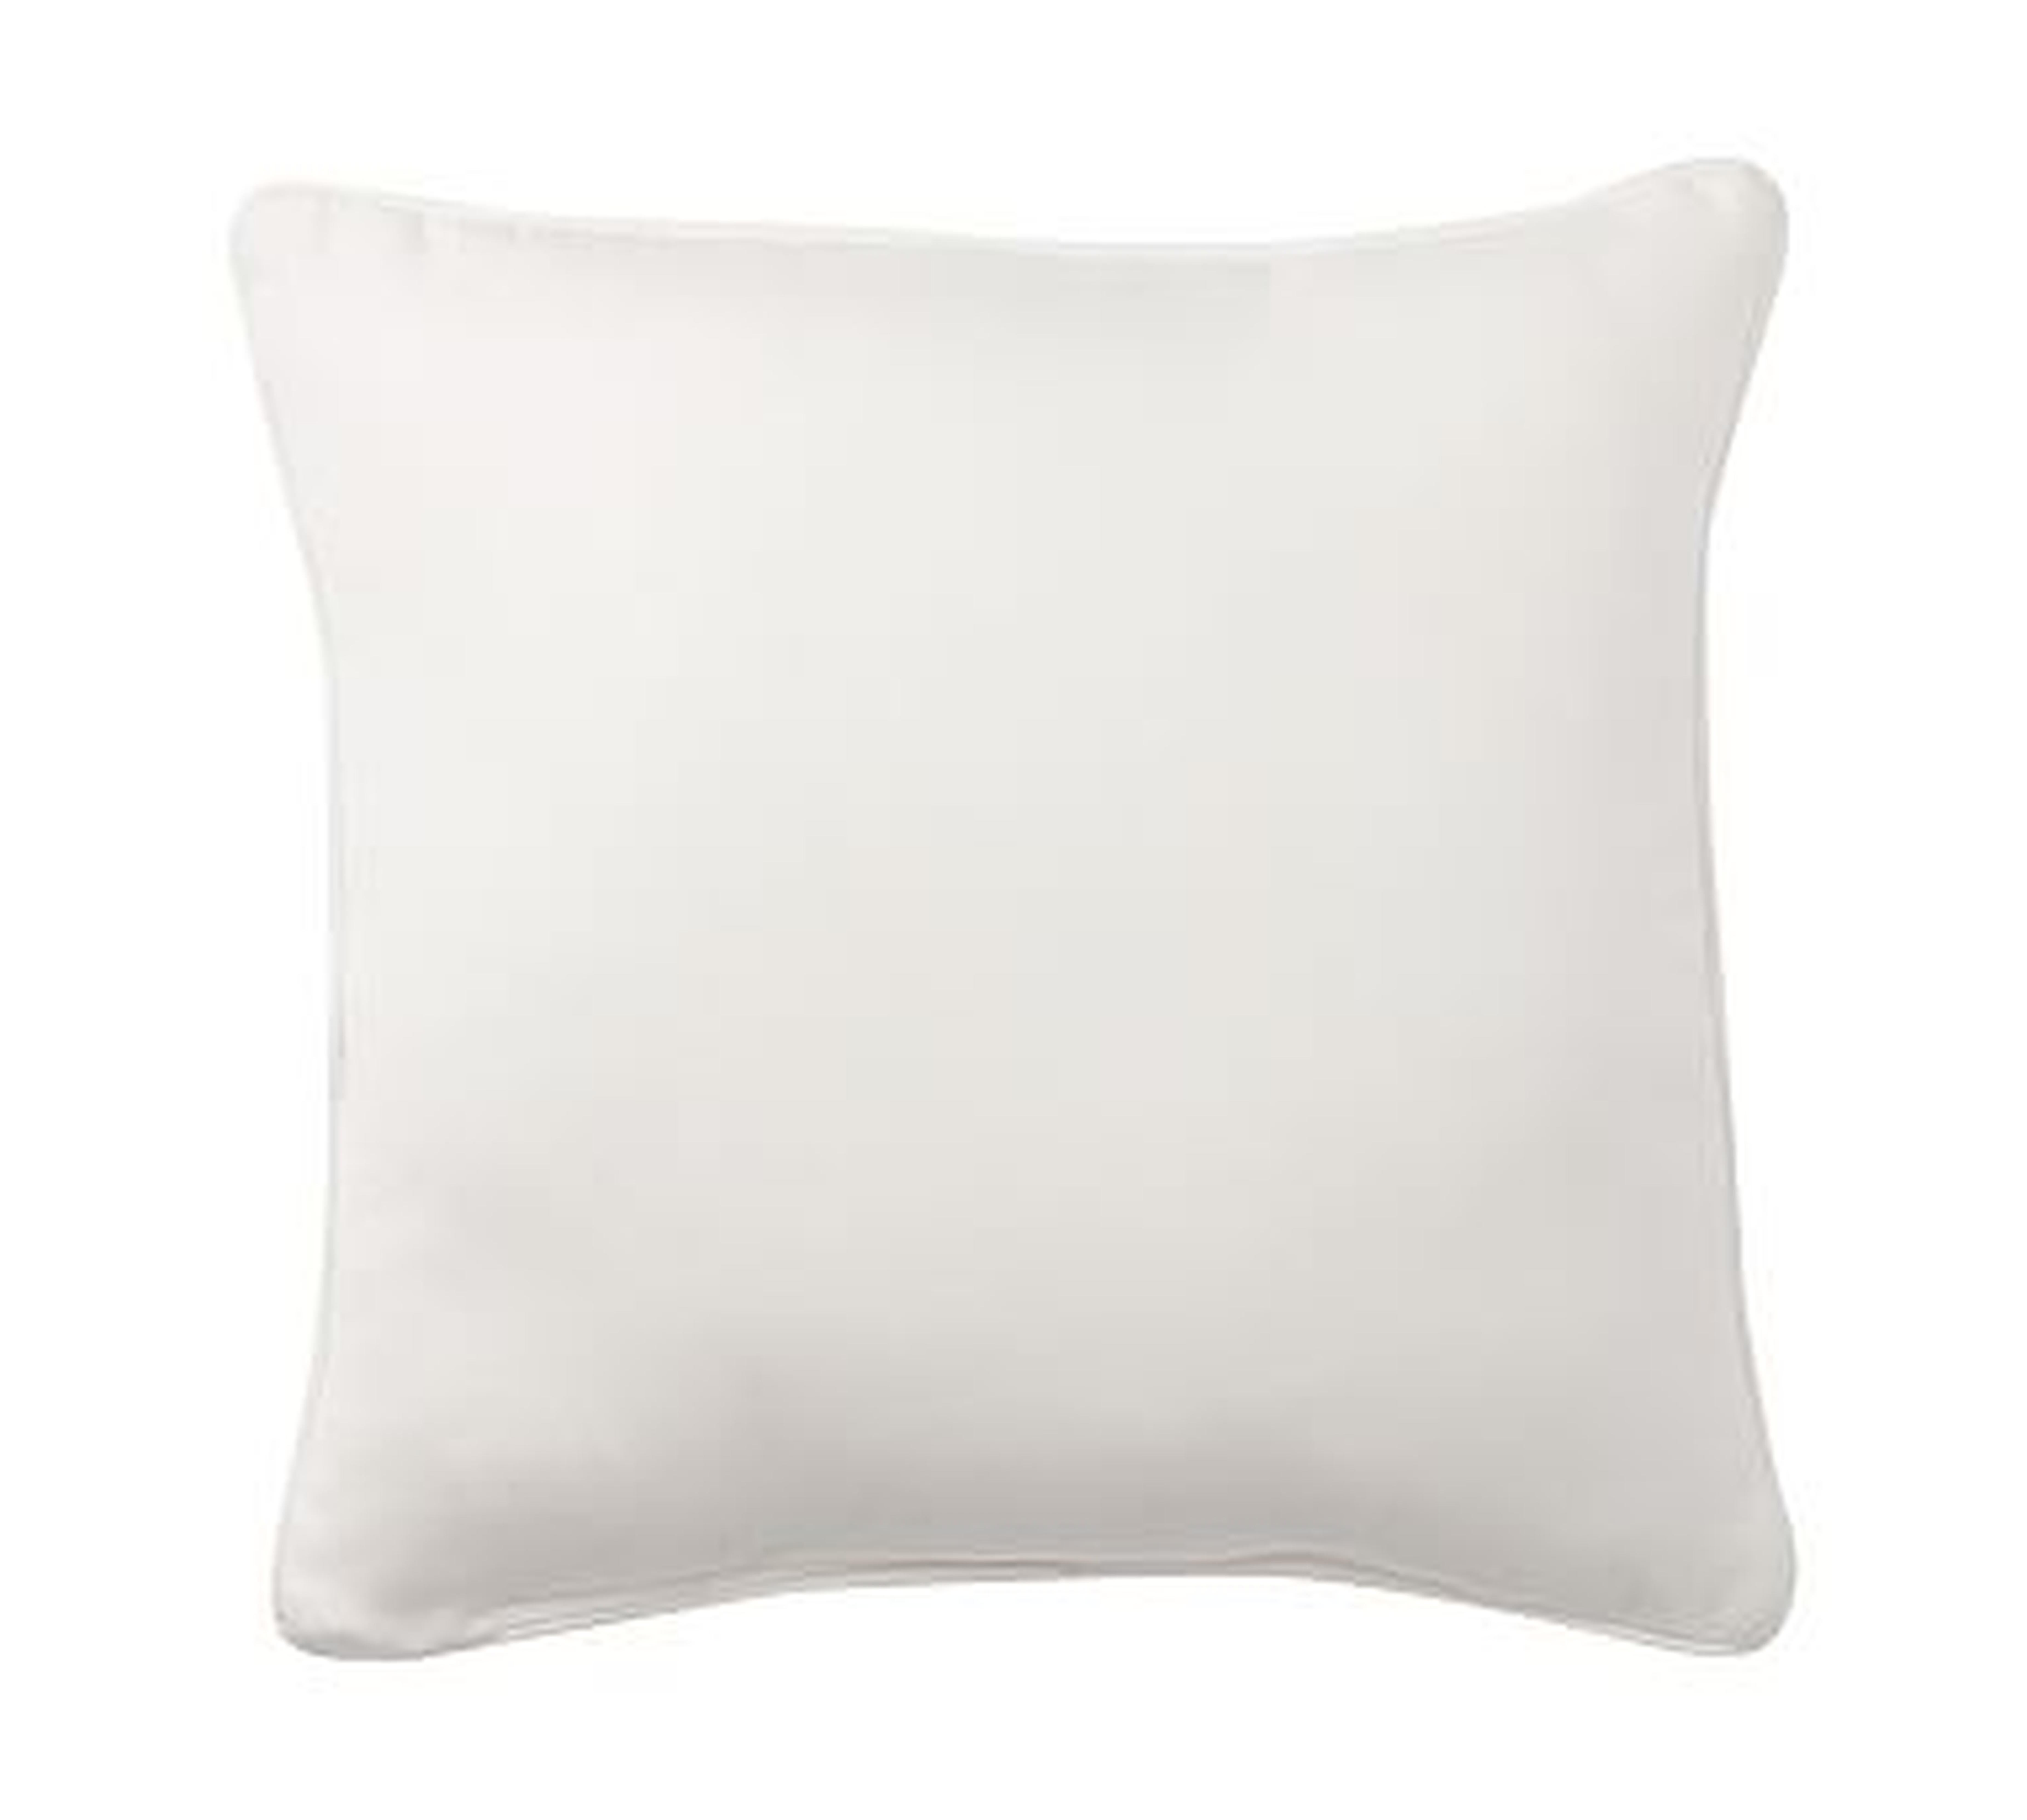 Sunbrella(R) Contrast Piped Solid Indoor/Outdoor Pillow, 24", Natural - Pottery Barn